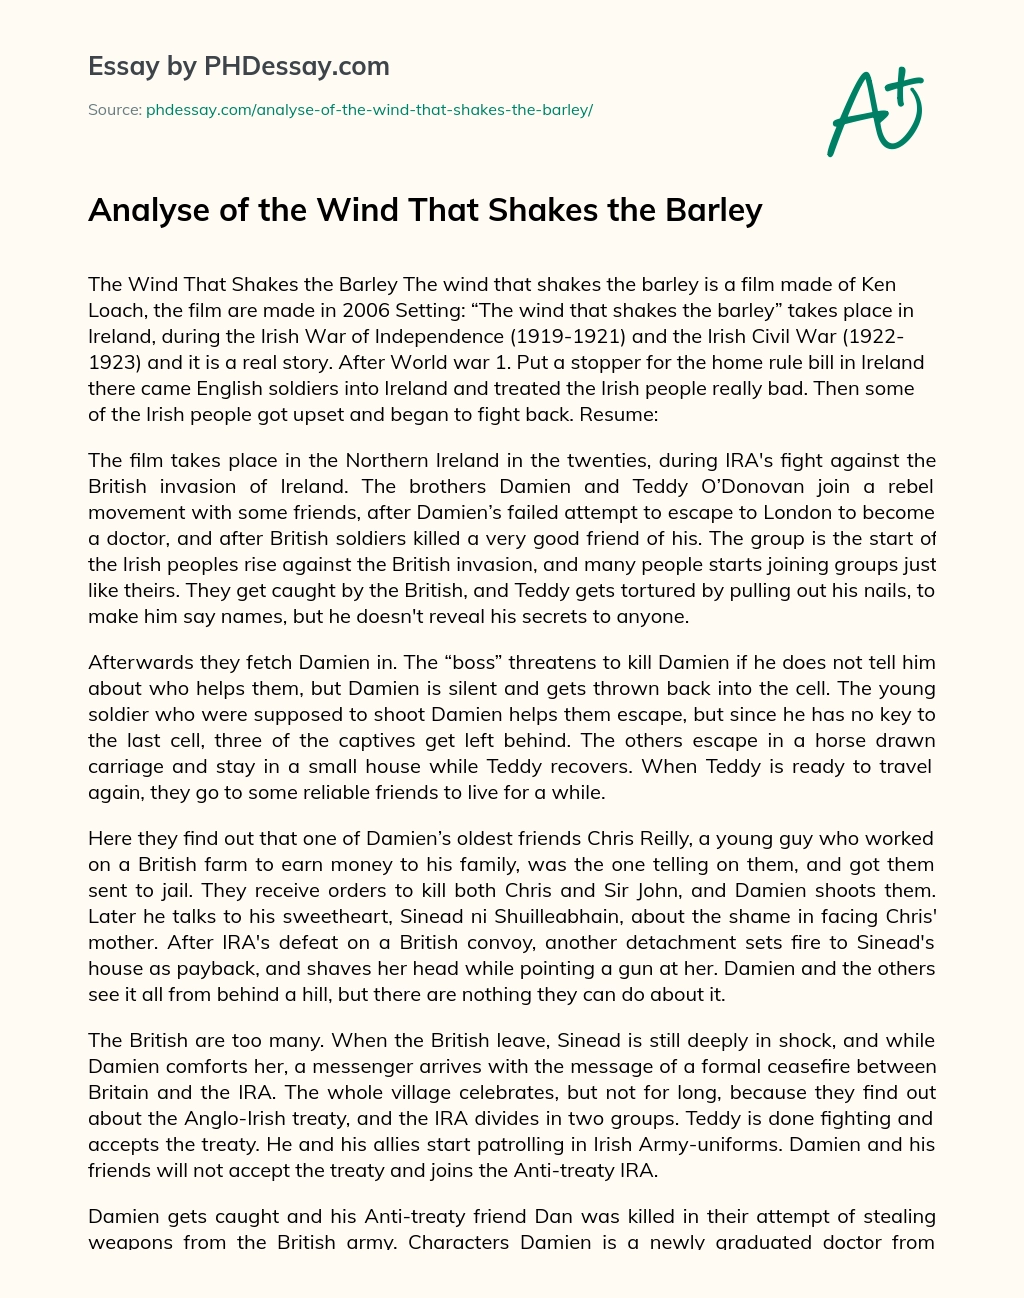 Analyse of the Wind That Shakes the Barley essay